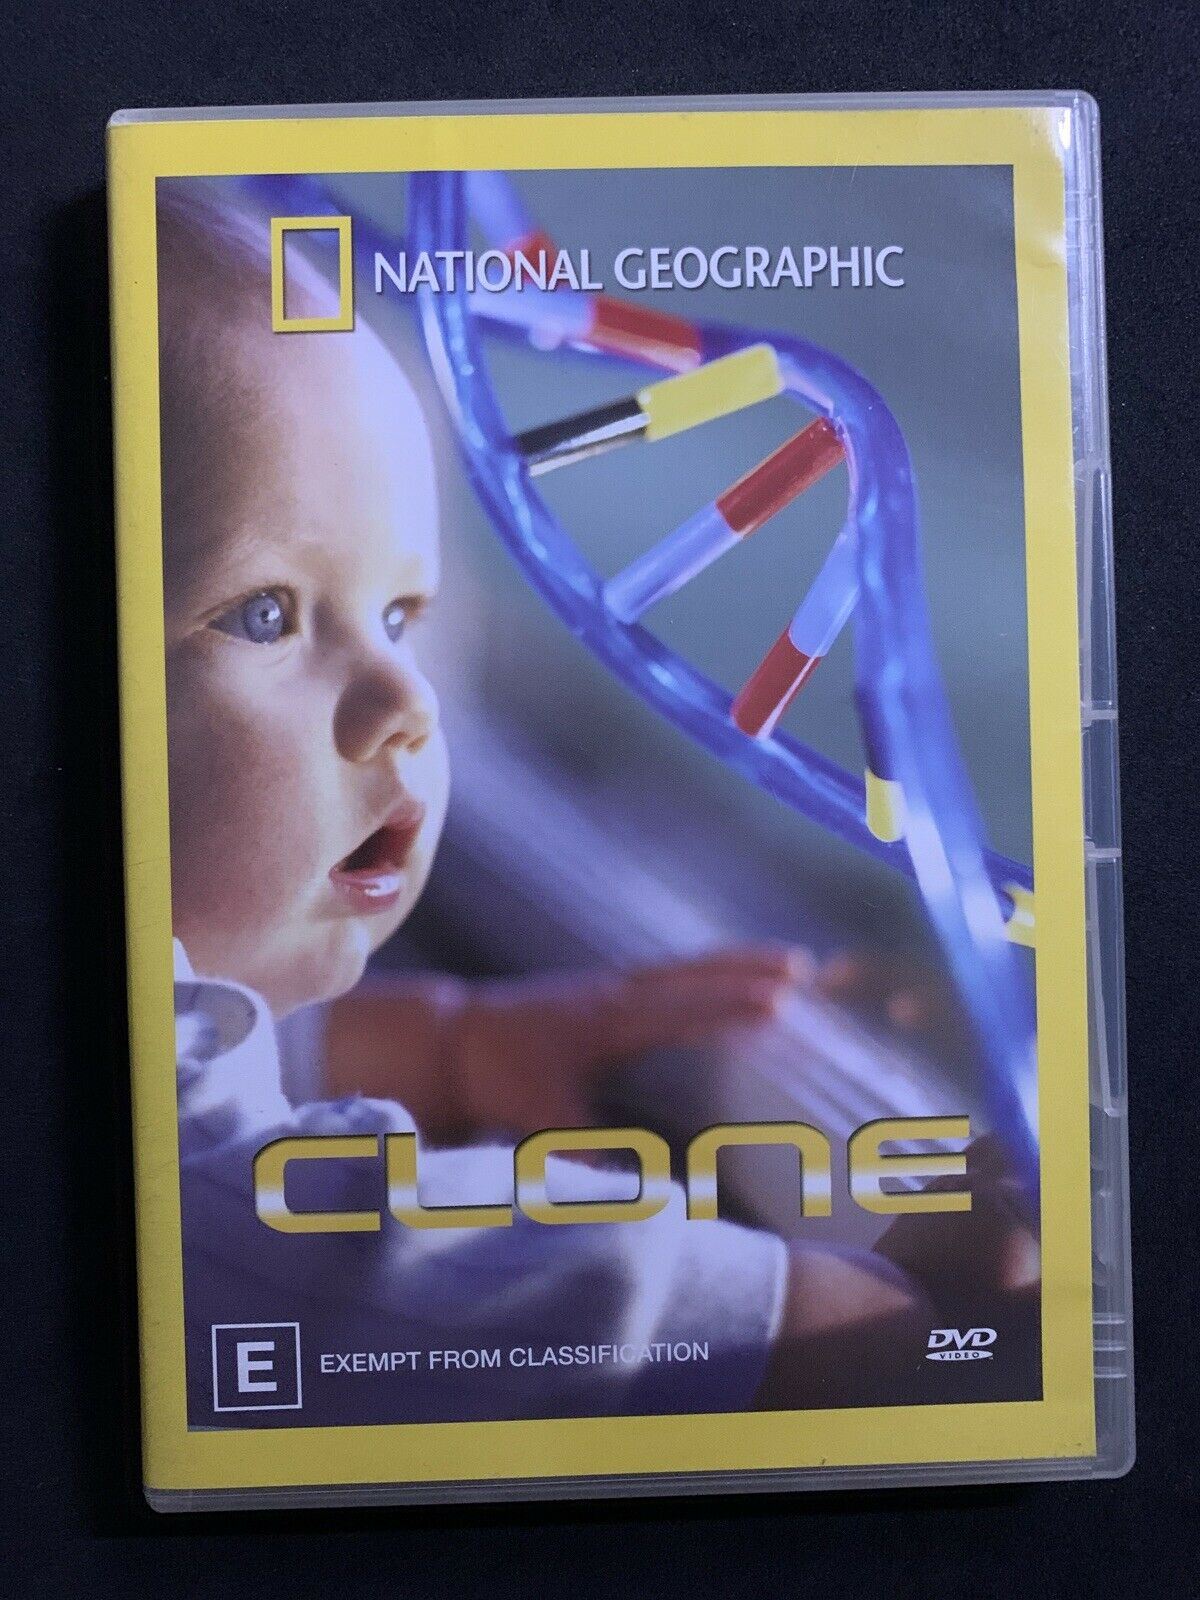 National Geographic - Clone (DVD, 2006) + Special Features!